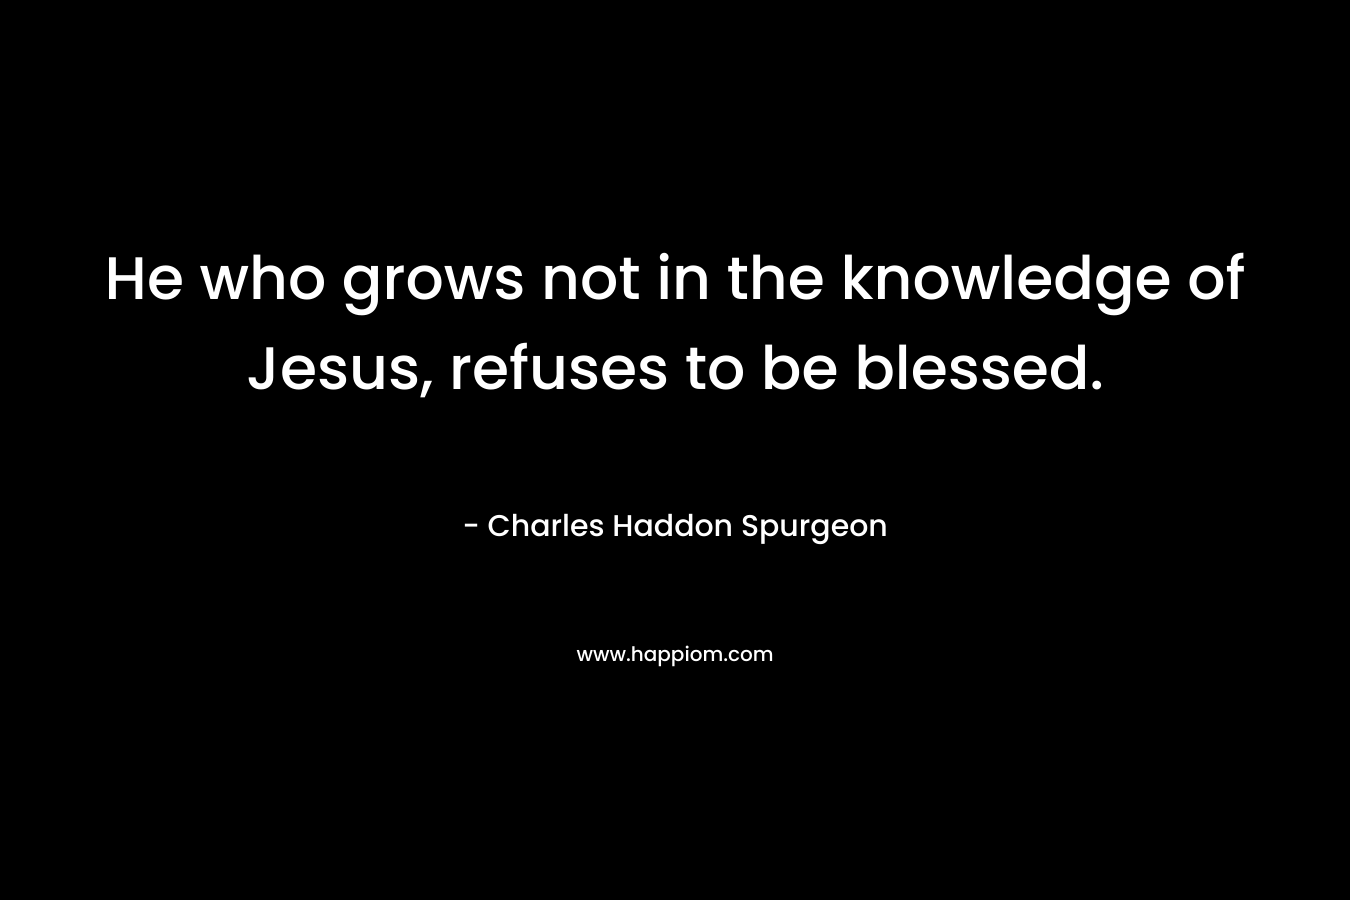 He who grows not in the knowledge of Jesus, refuses to be blessed. – Charles Haddon Spurgeon